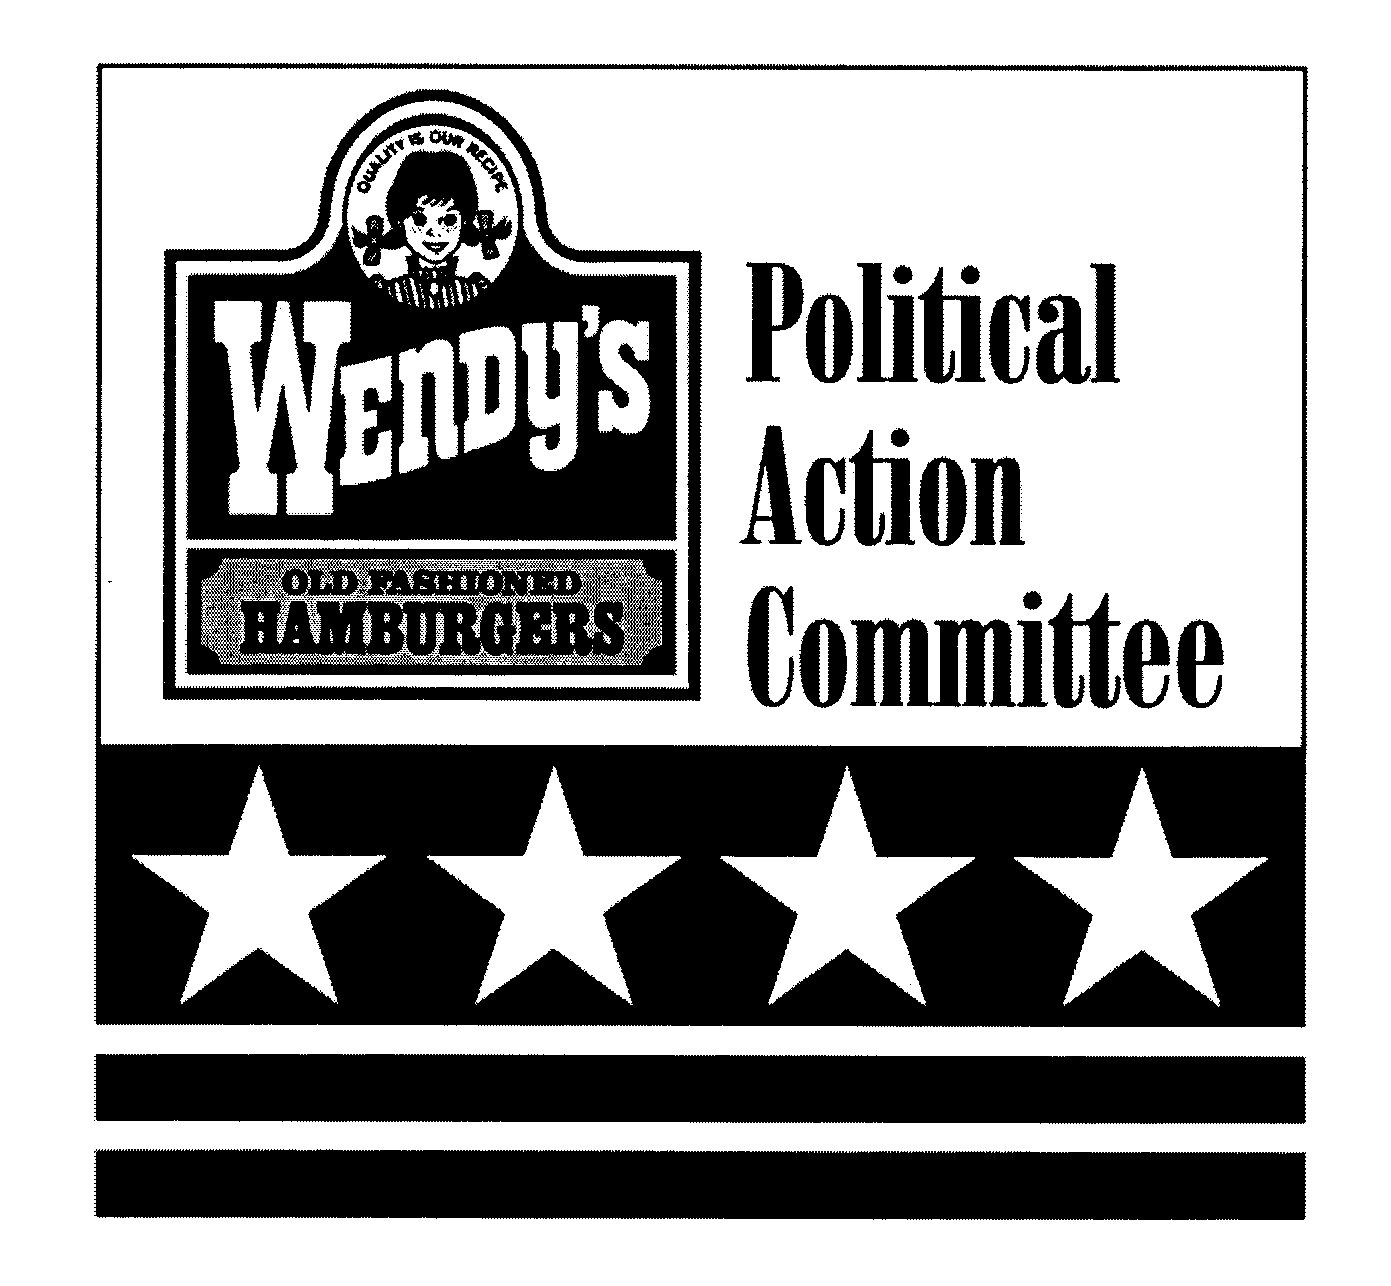  WENDY'S OLD FASHIONED HAMBURGERS QUALITY IS OUR RECIPE POLITICAL ACTION COMMITTEE